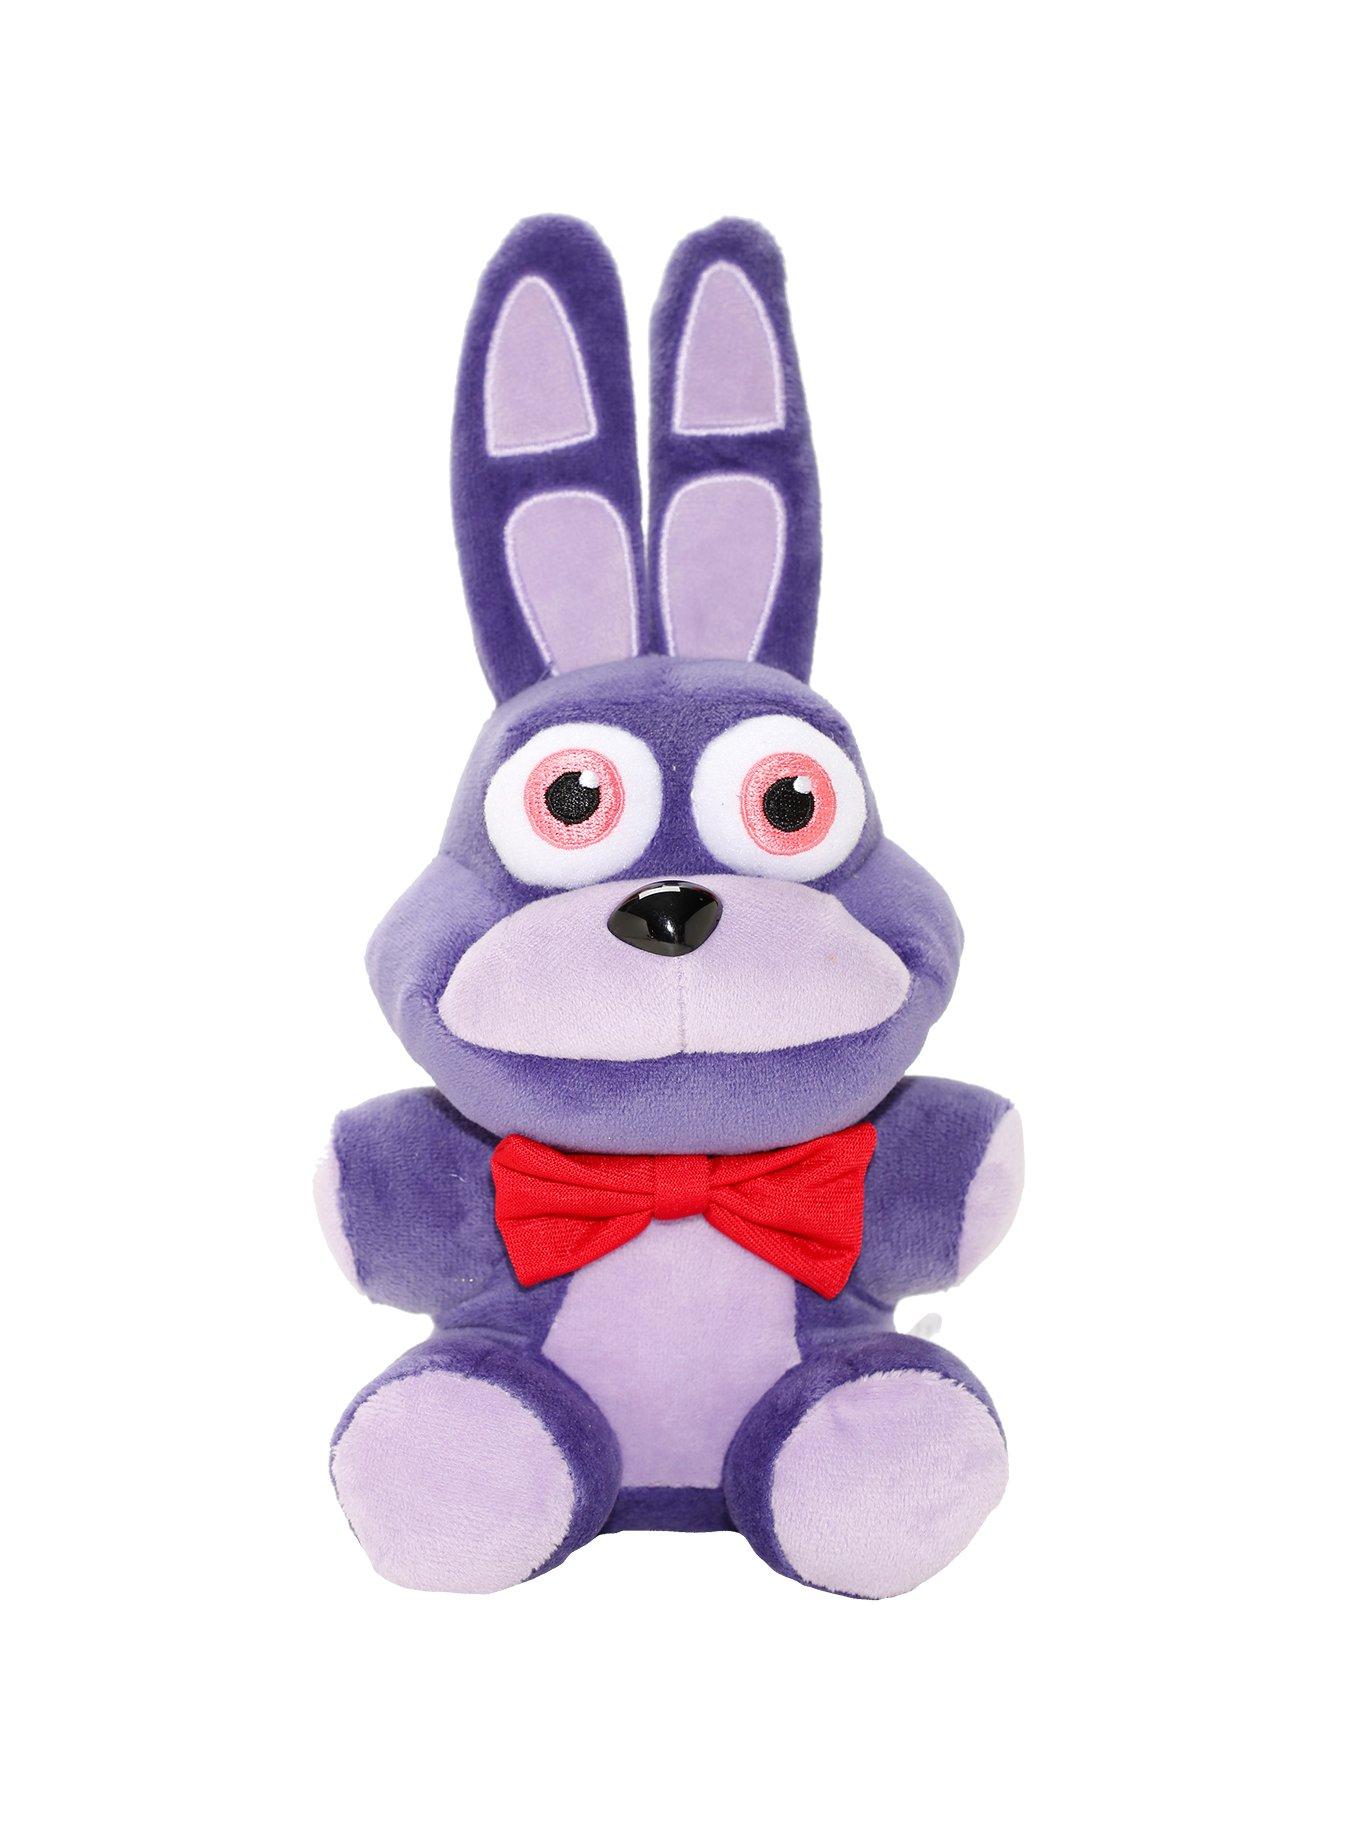 Funko Plush: Five Nights at Freddy's (FNAF) - Blkheart Bonnie The Rabbit -  (CL 7) - Collectable Soft Toy - Birthday Gift Idea - Official Merchandise